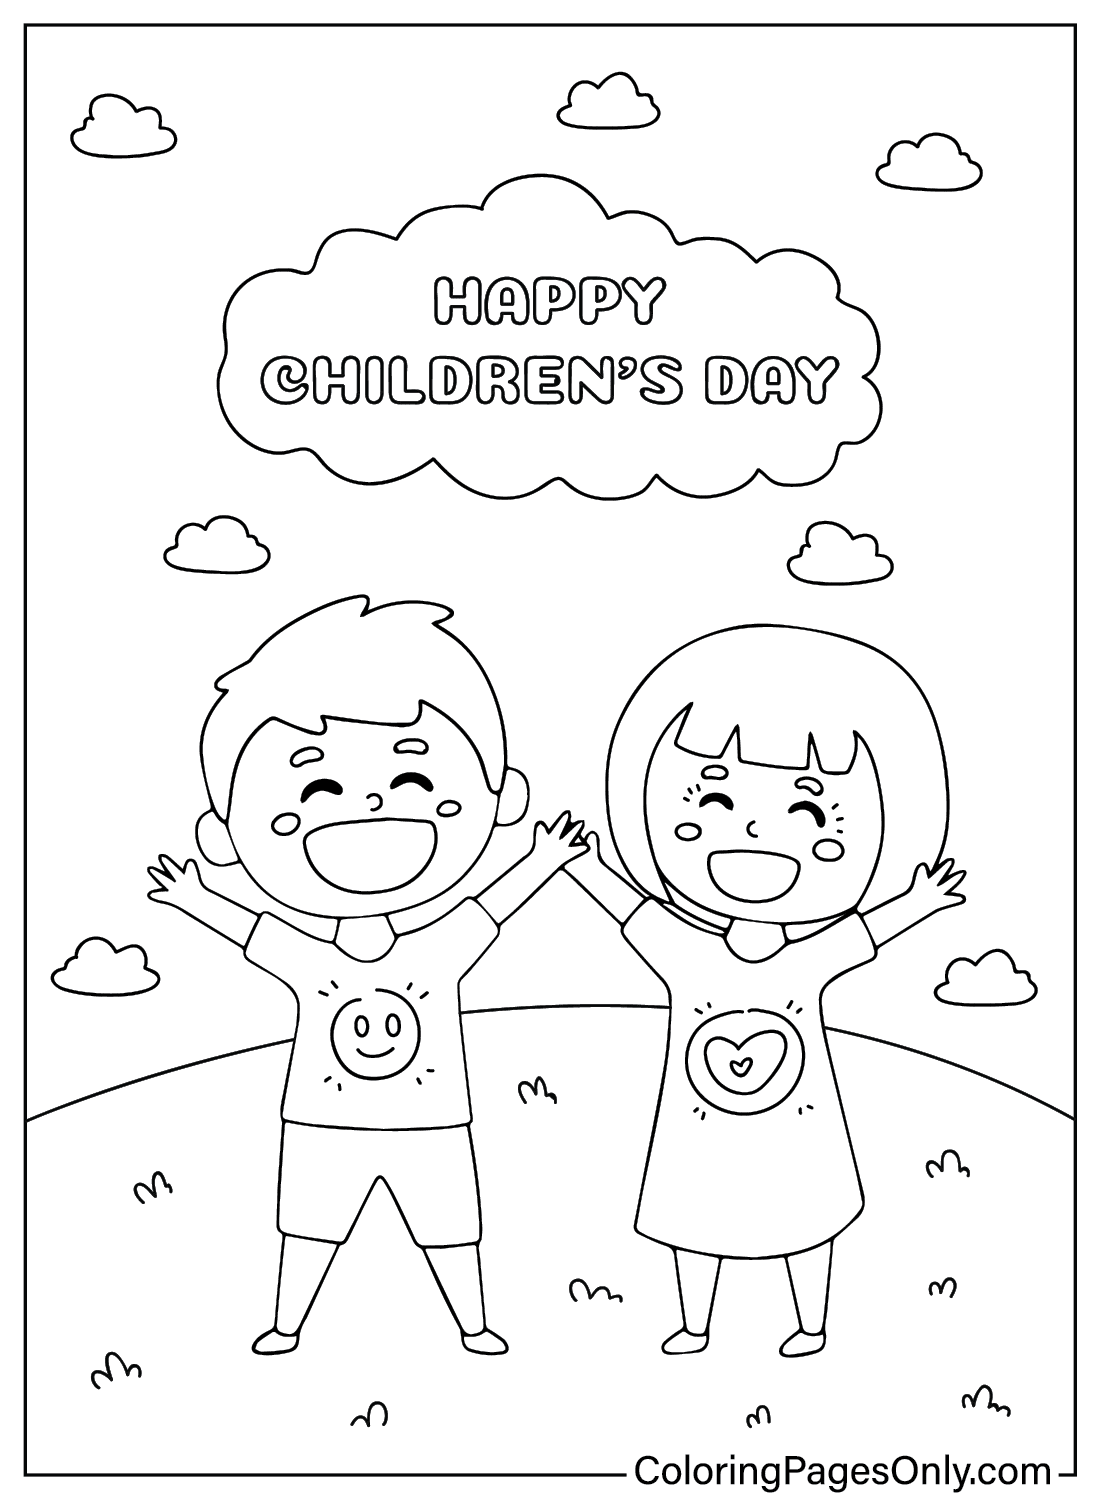 Children’s Day Coloring Page Printable